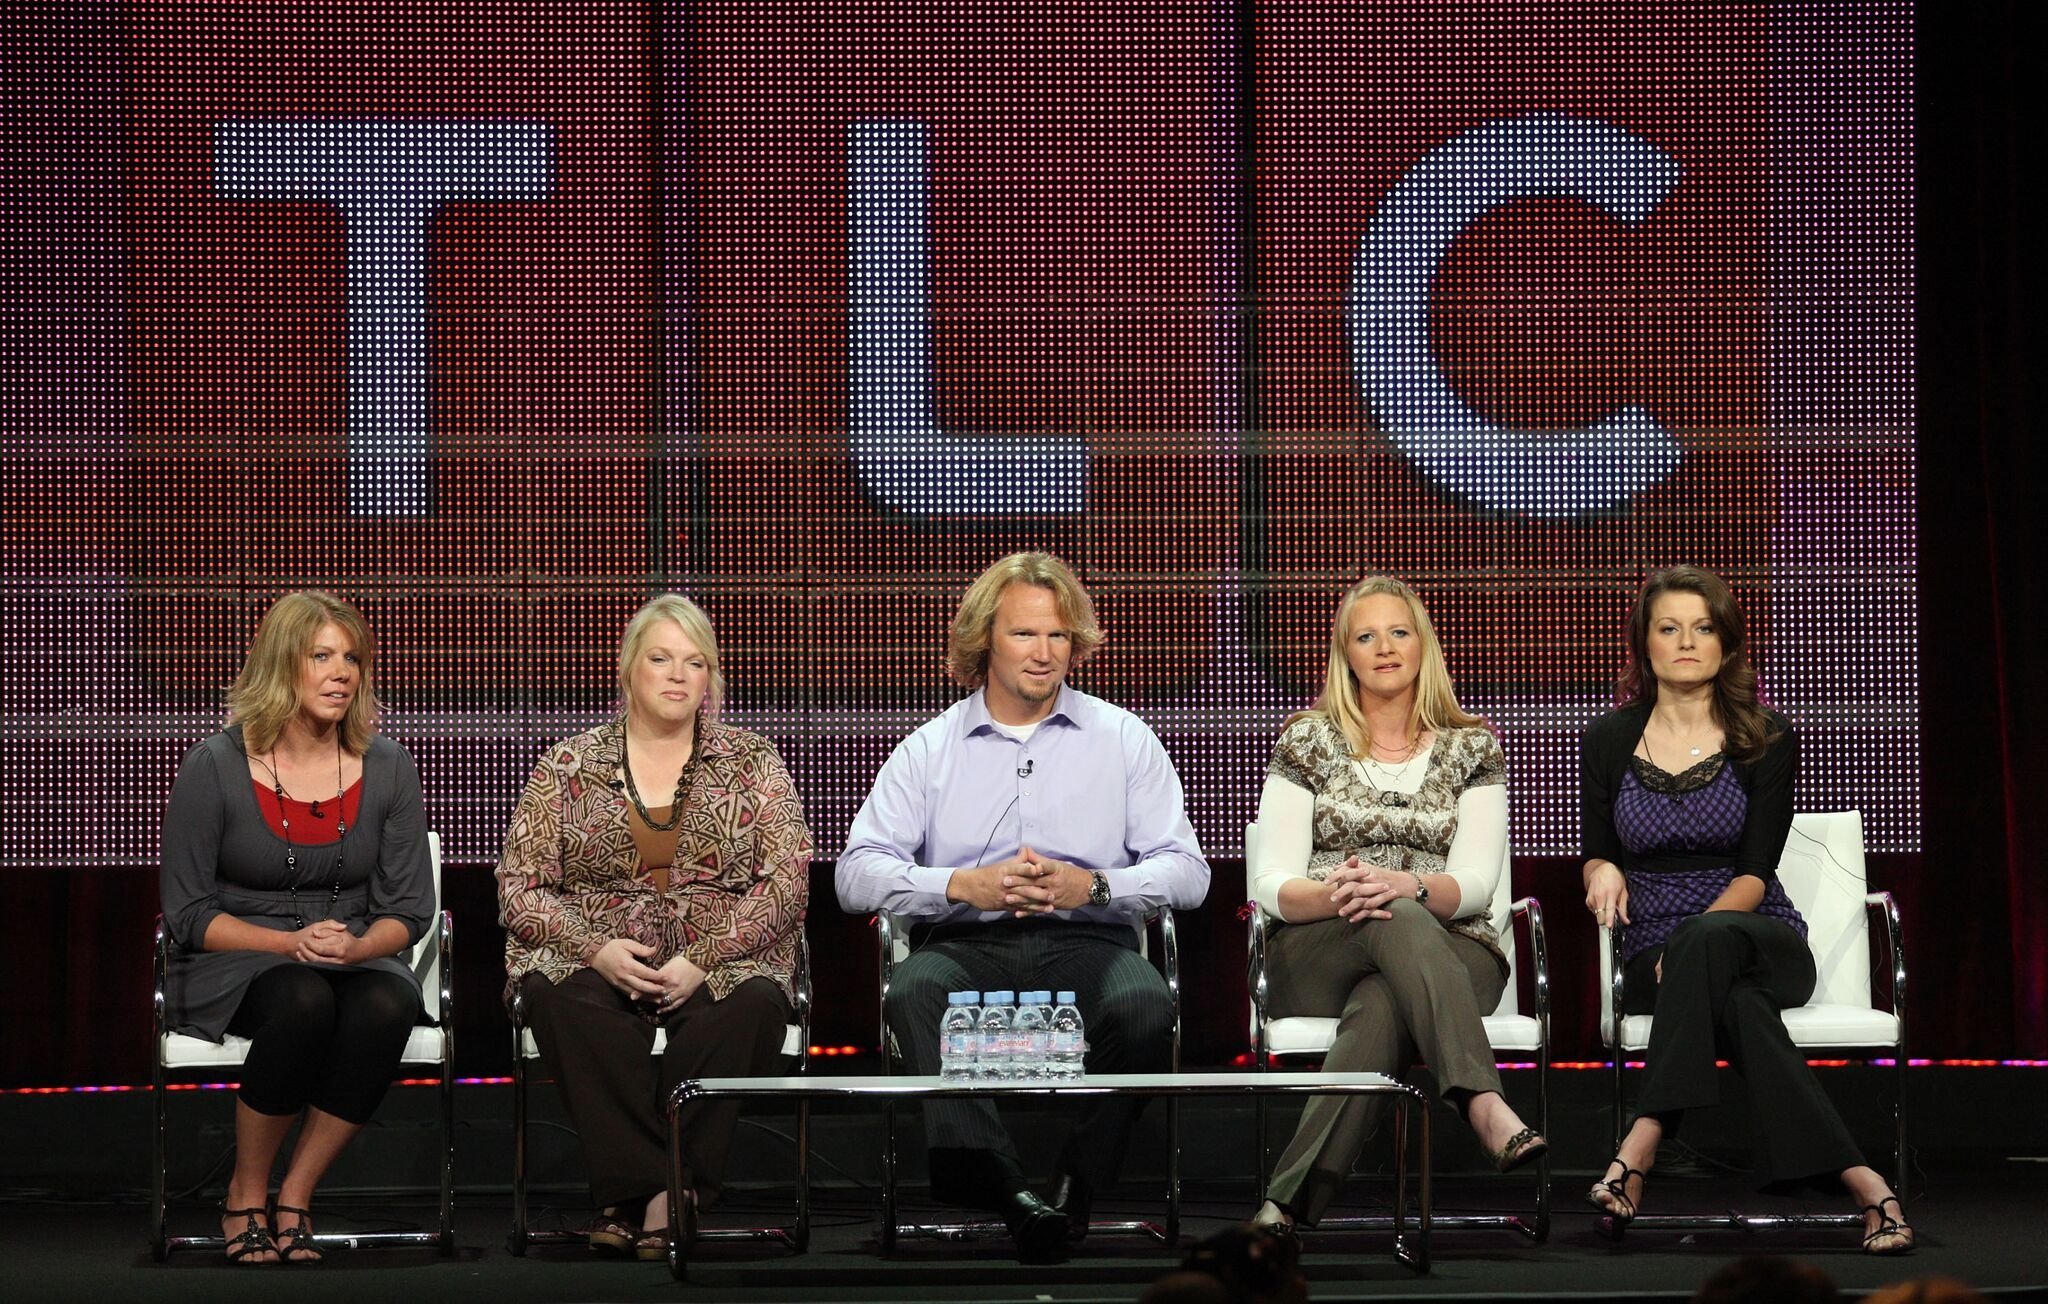 Meri Brwon, Janelle Brown, Kody Brown, Christine Brown and Robyn Brown speak duinrg the "Sister Wives" panel  | Getty Images